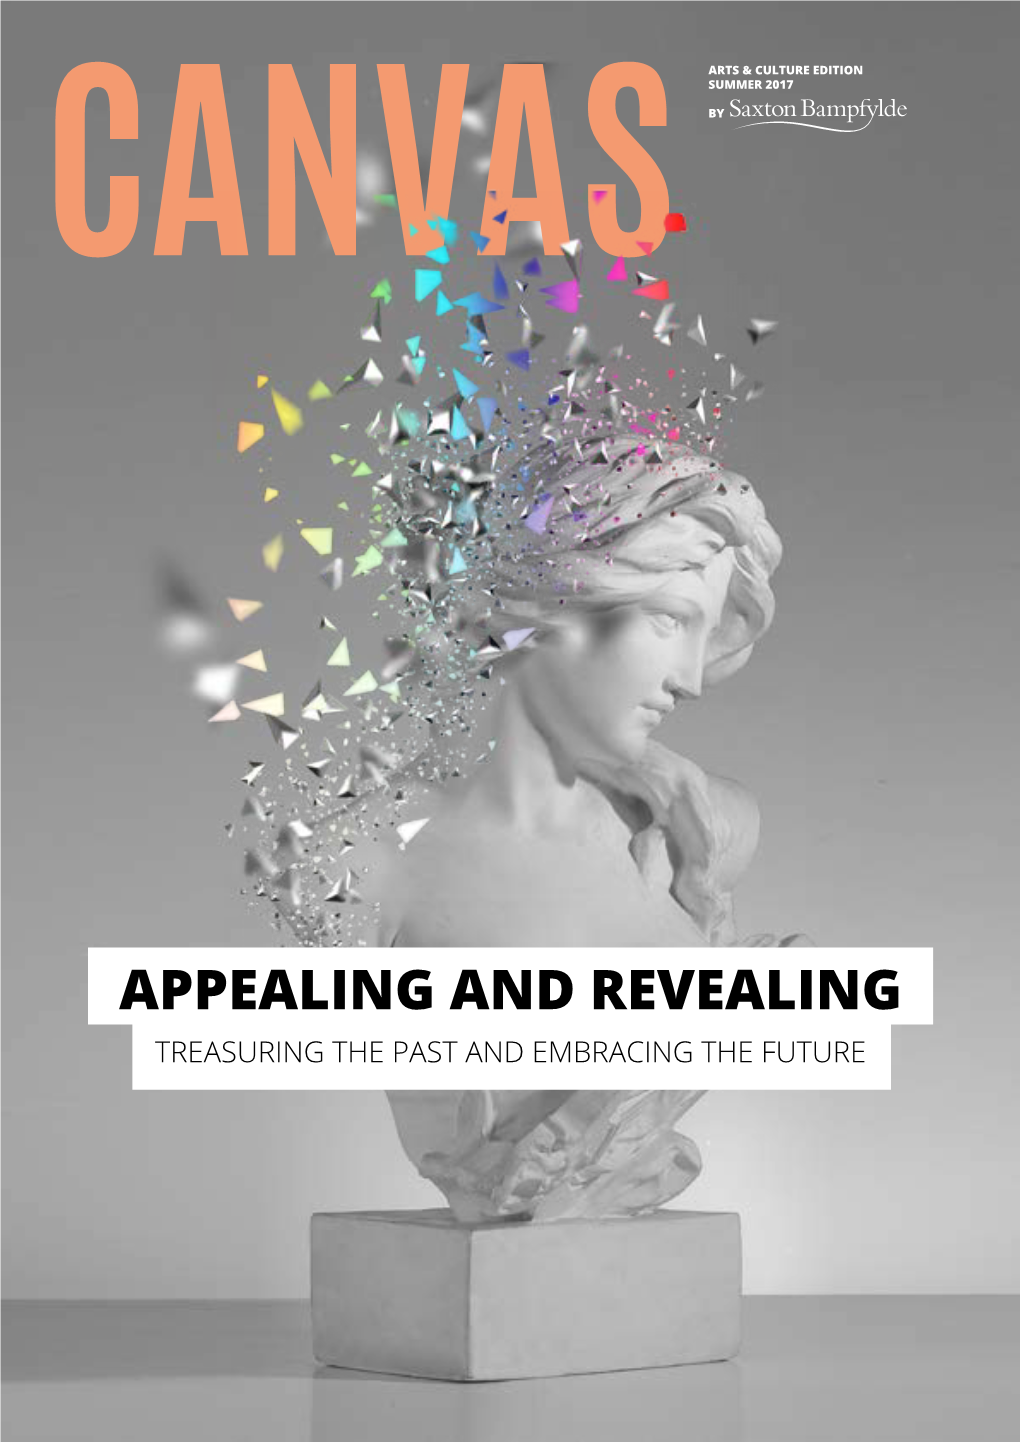 Appealing and Revealing Treasuring the Past and Embracing the Future Canvas Arts & Culture by Saxton Bampfylde Welcome